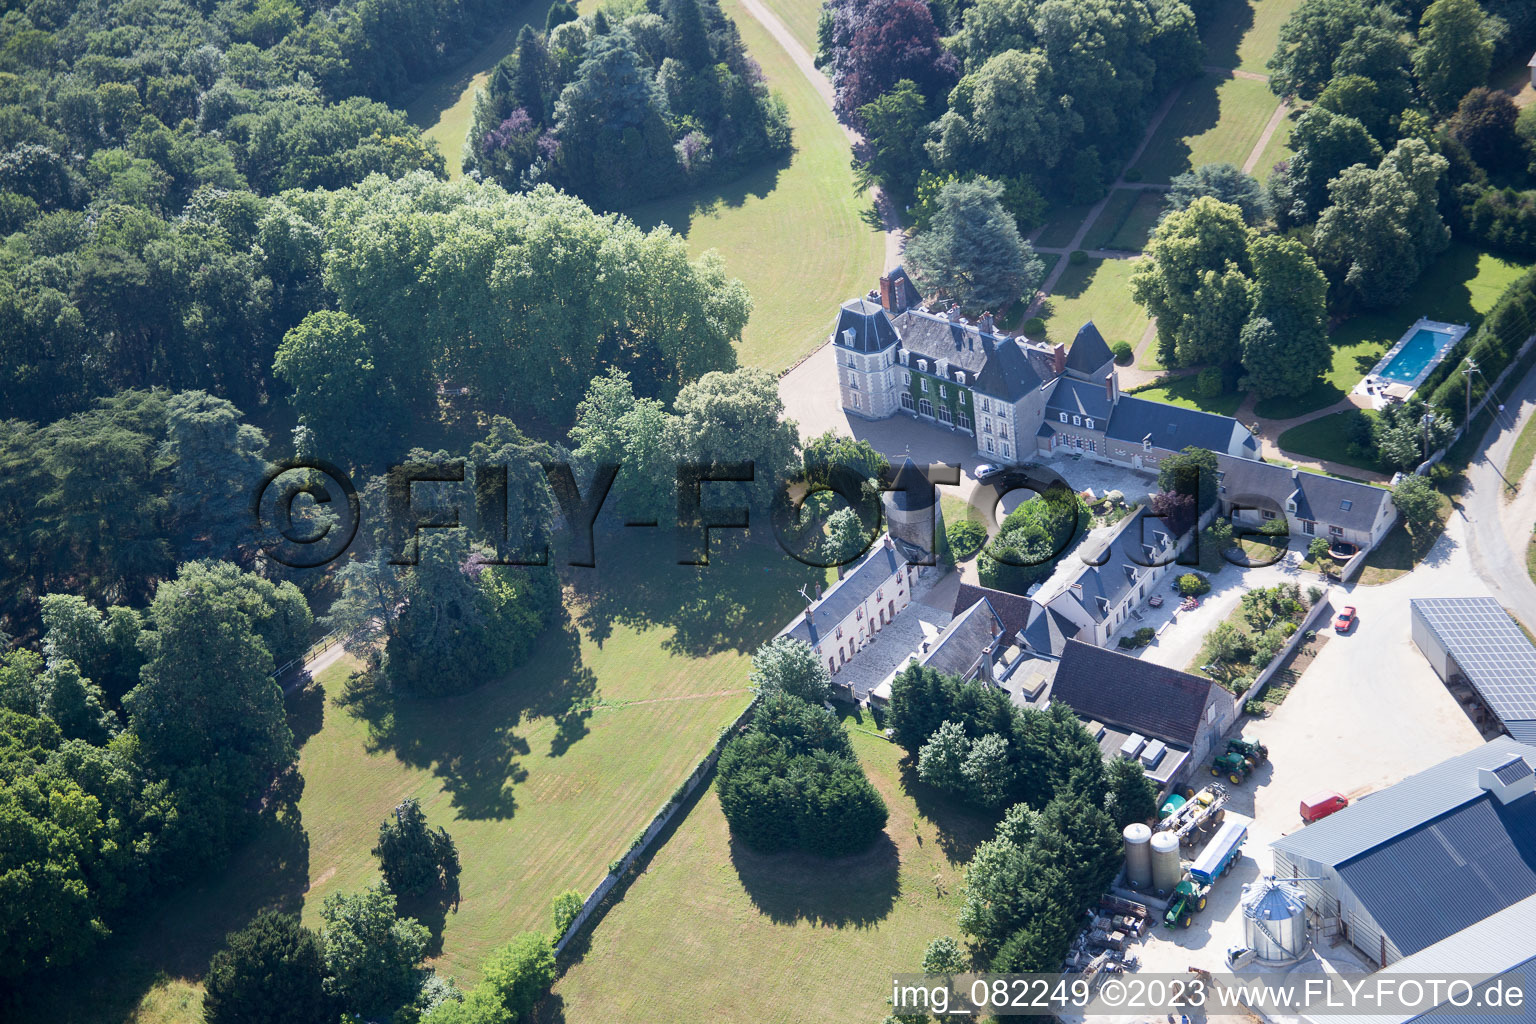 Bird's eye view of Landes-le-Gaulois in the state Loir et Cher, France